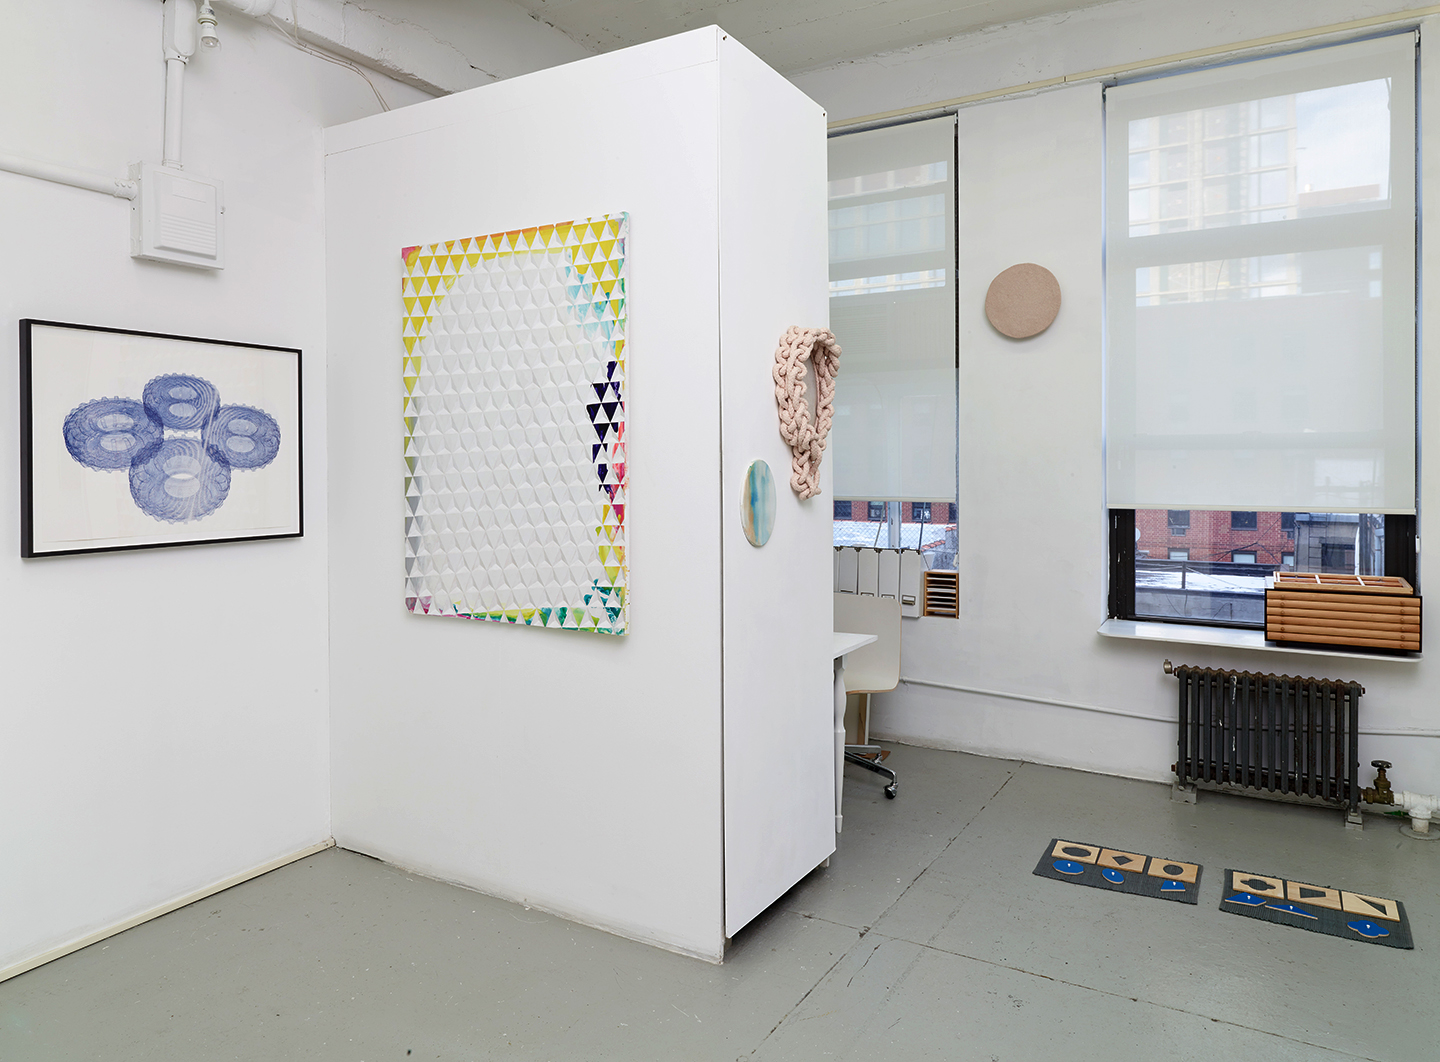 Installation view of works included in the group exhibition 'Geometric Cabinet' showing works in various mediums